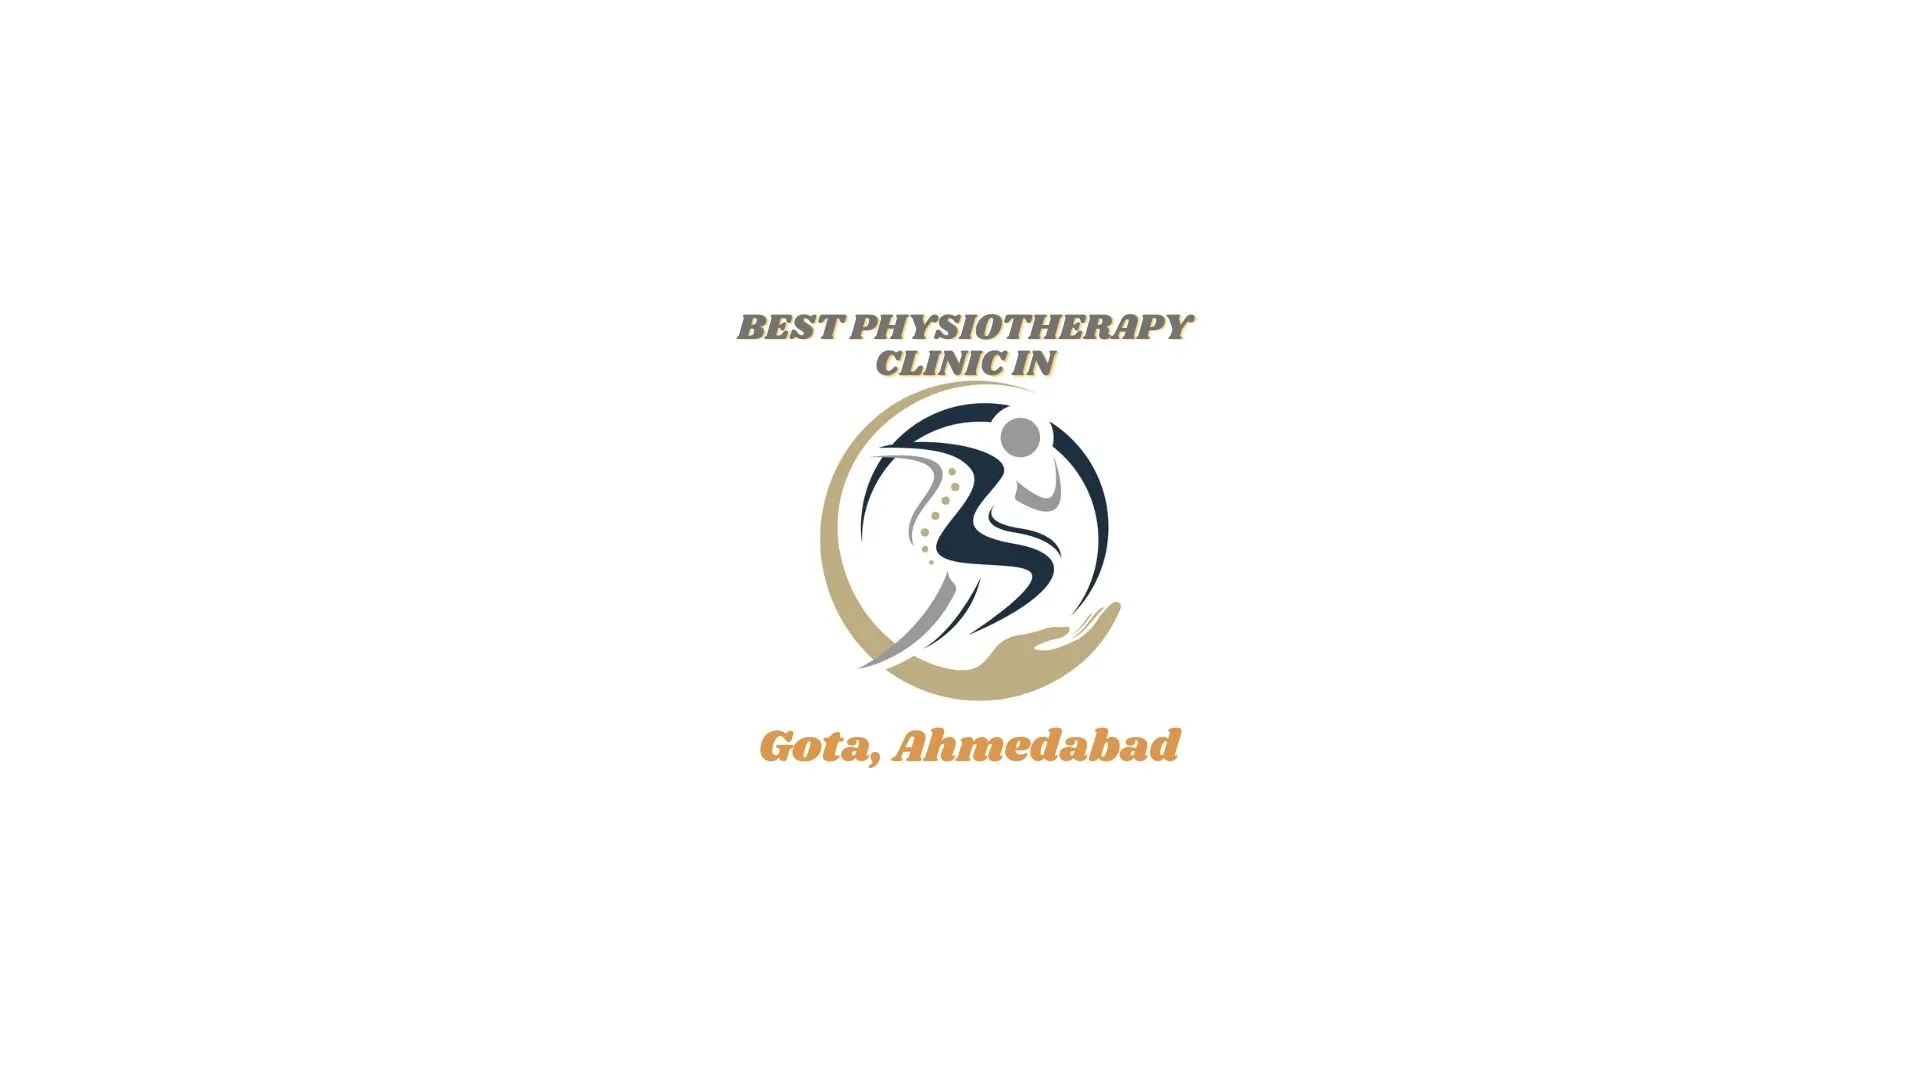 BEST PHYSIOTHERAPY CLINIC IN GOTA